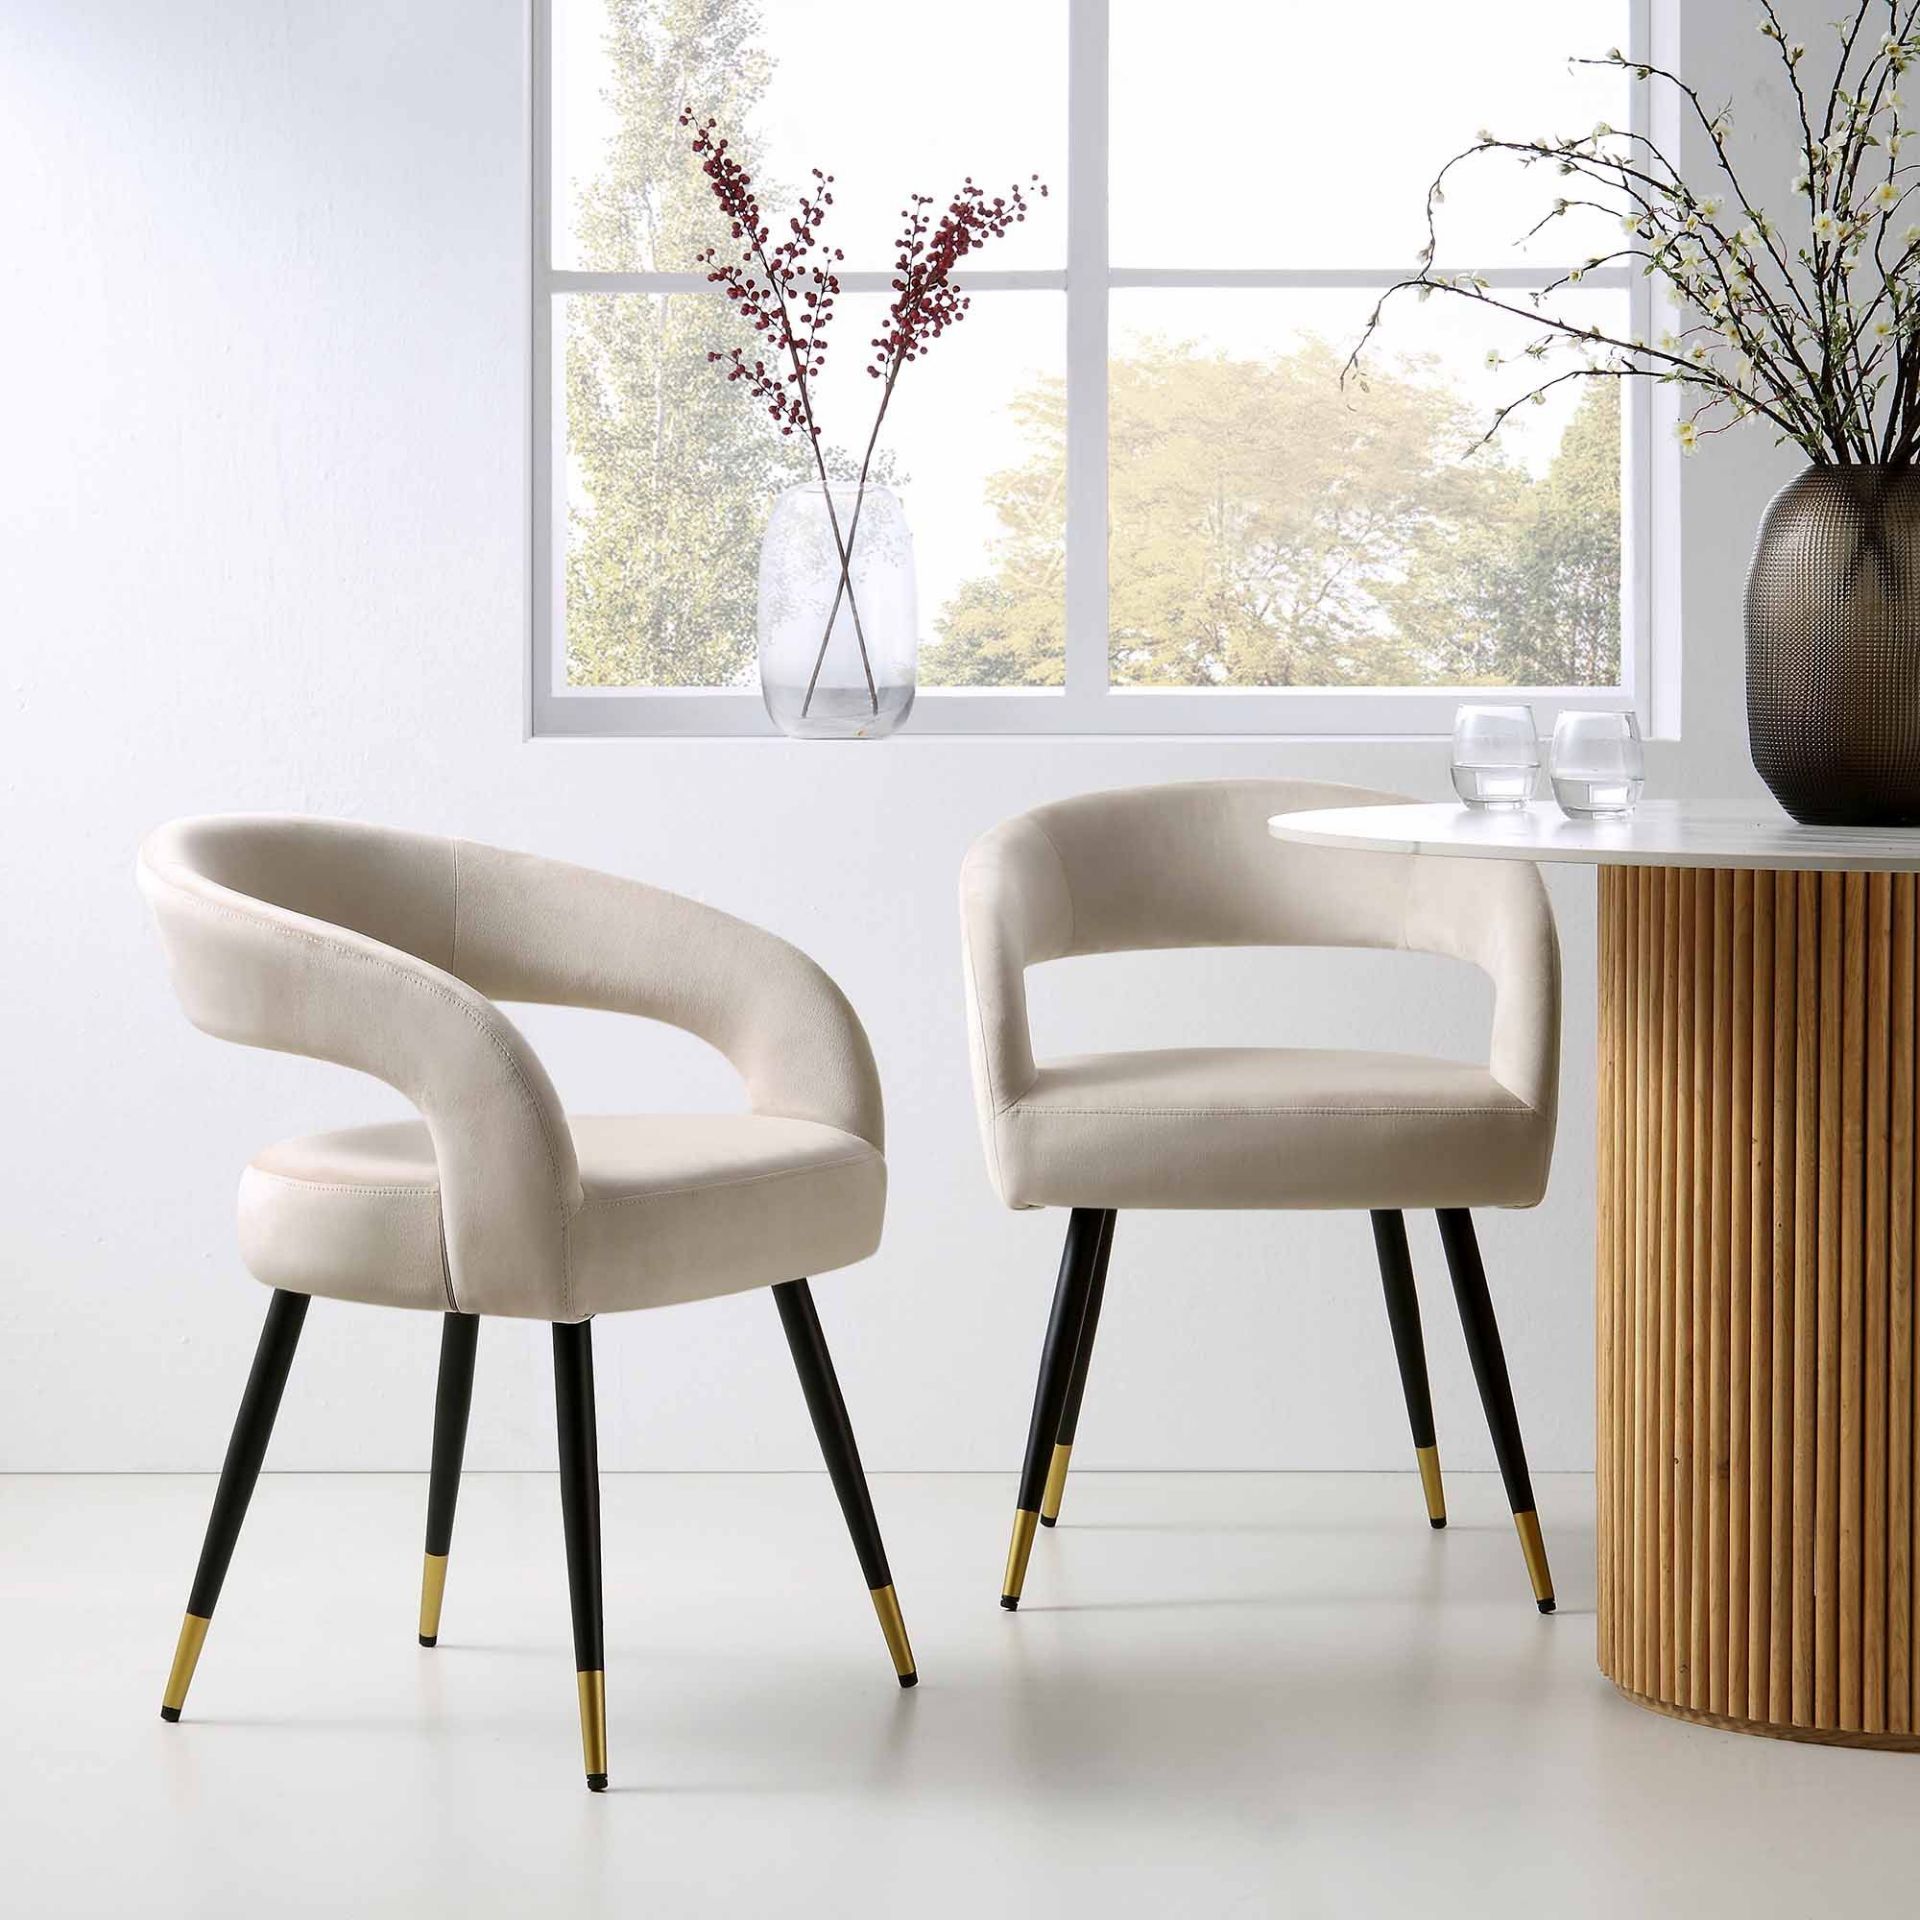 Laurel Wave Champagne Velvet Set of 2 Dining Chairs. - R19.2. RRP £299.99. The curved cut out - Image 3 of 4